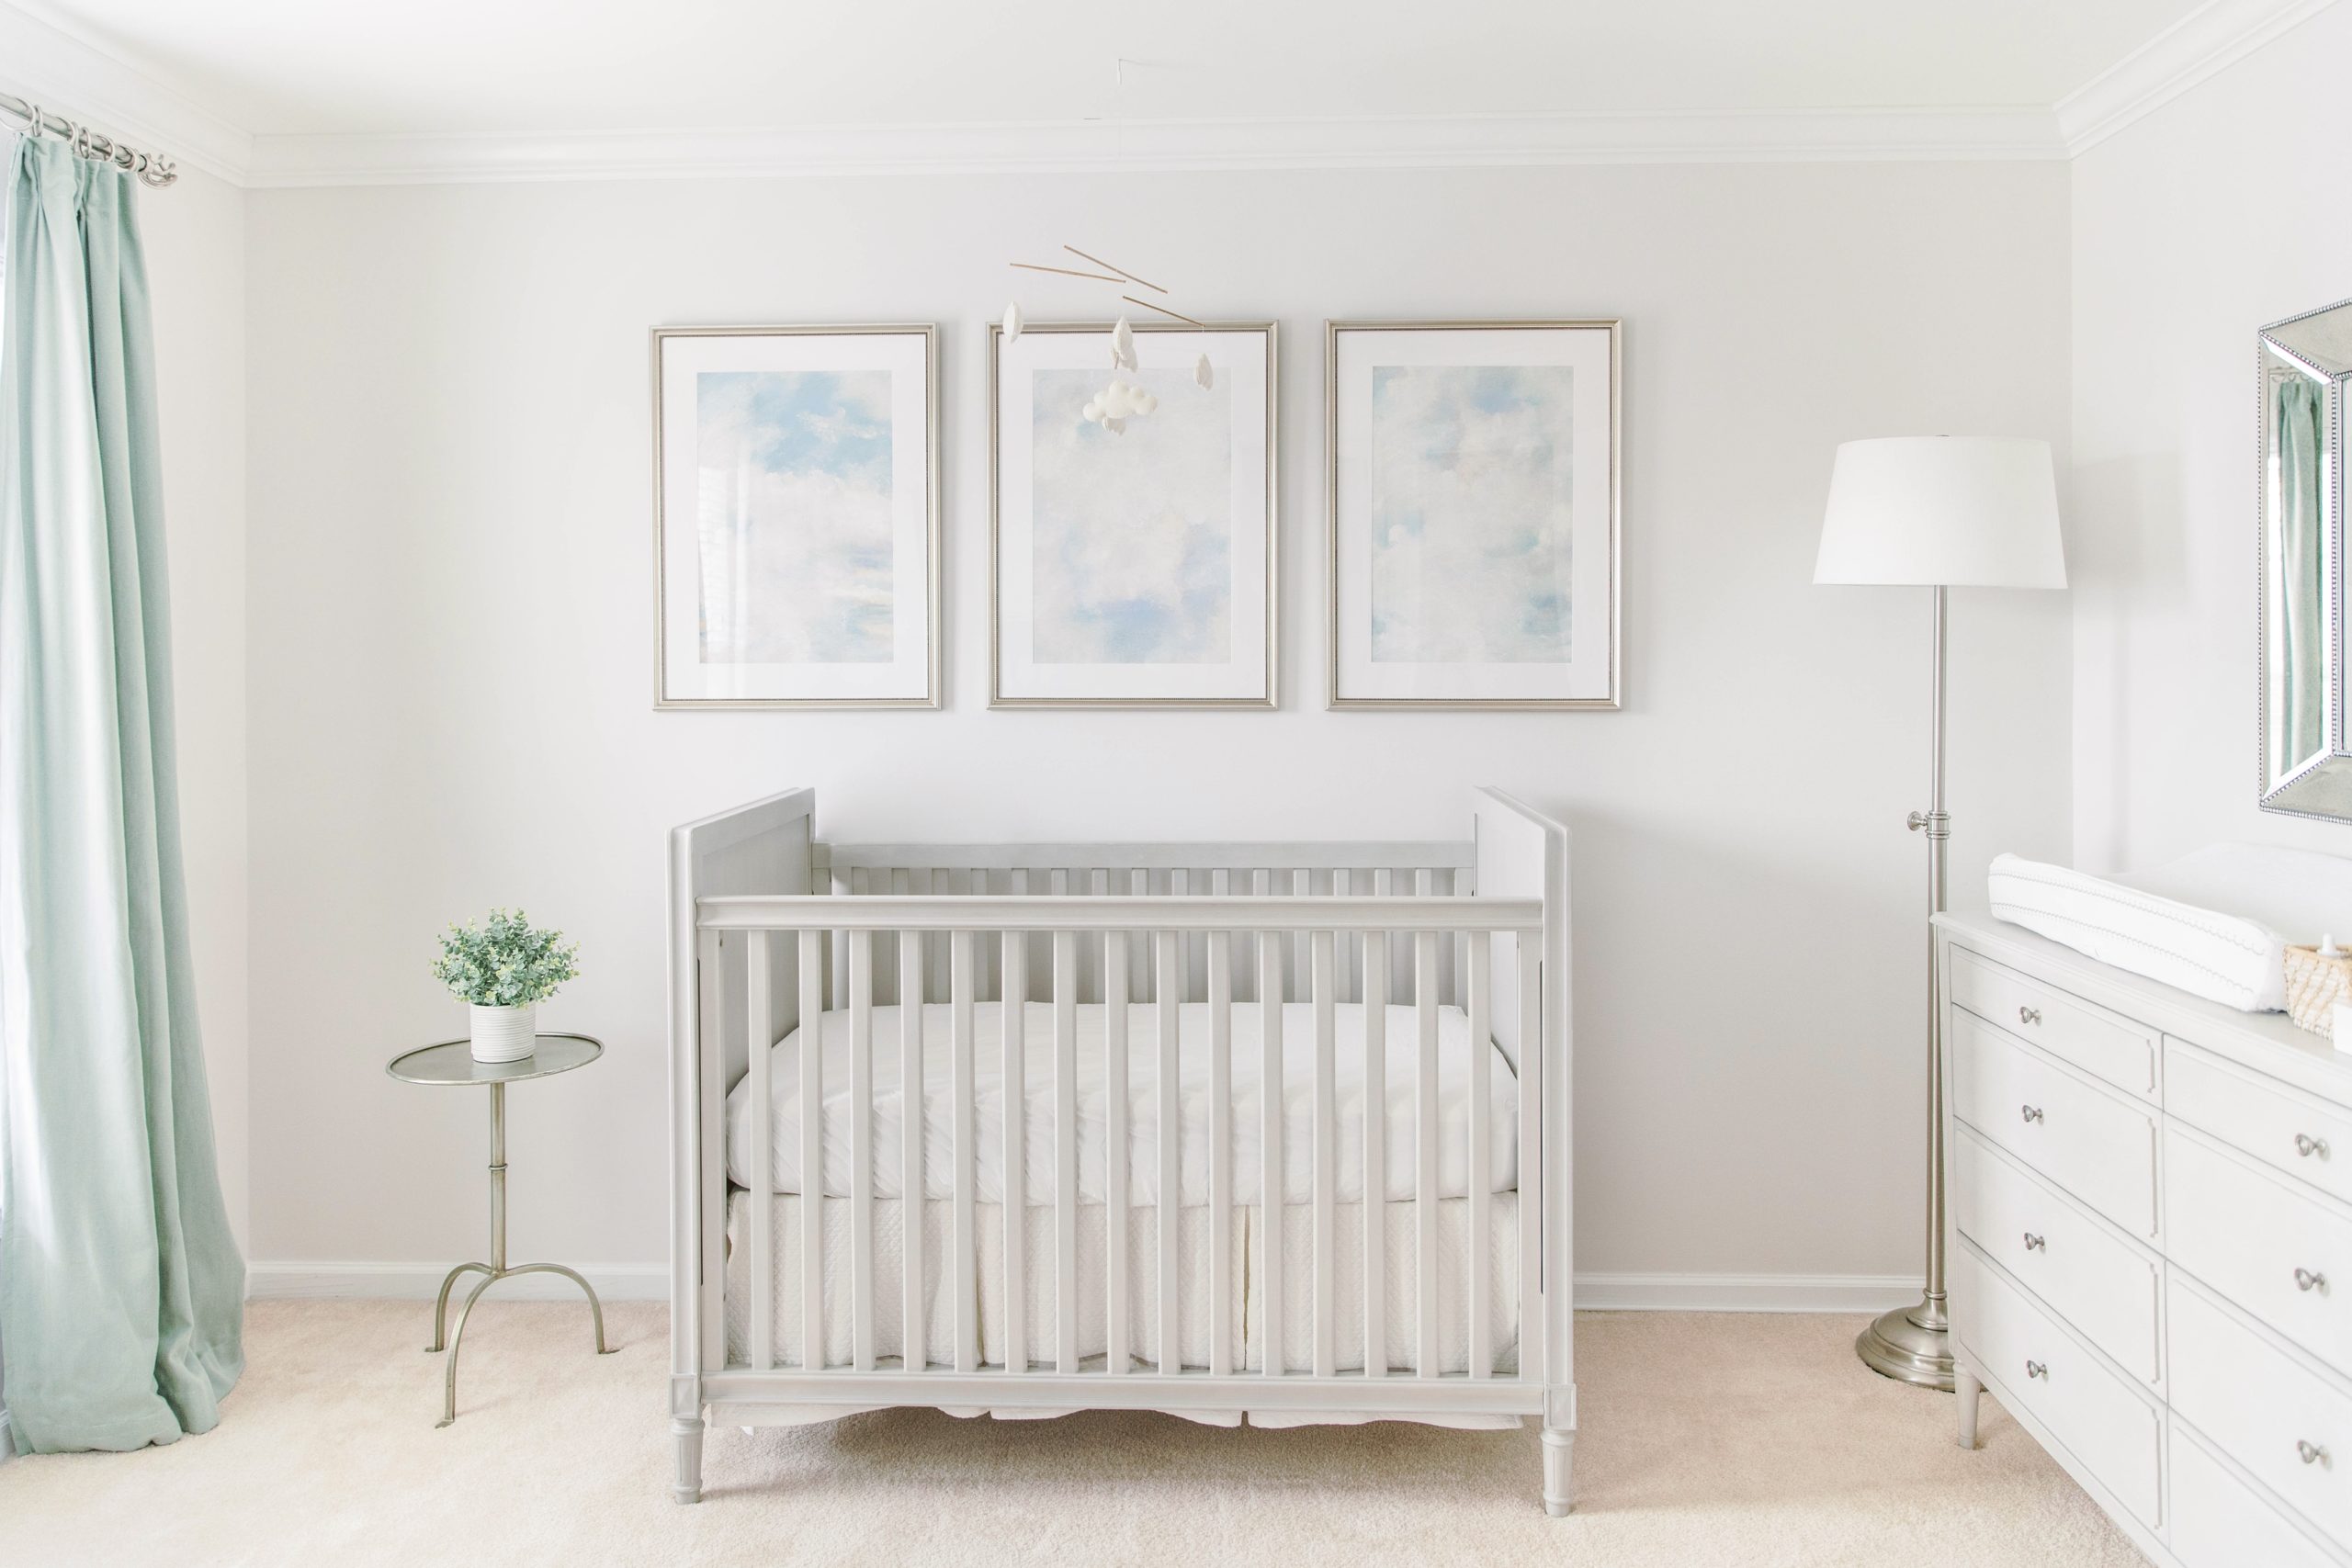 A subtle and elegant travel themed nursery with furniture from the Marcelle collection at Restoration Hardware.